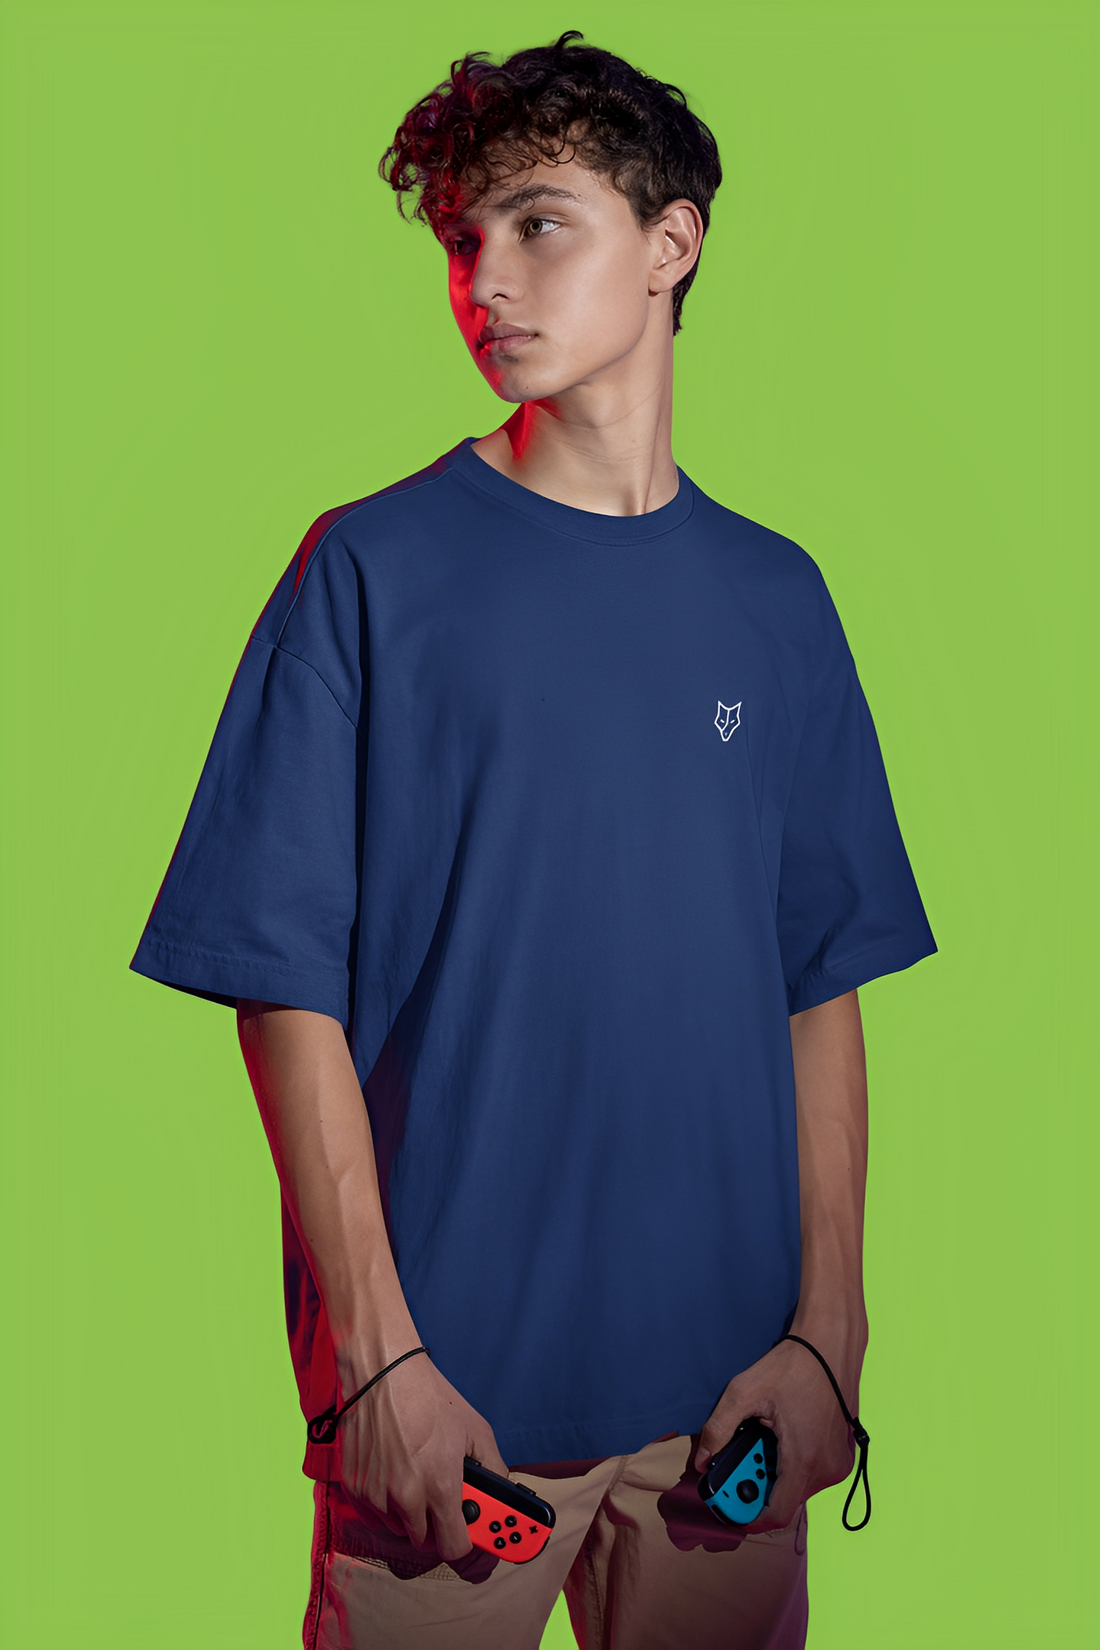 Upgrade Your Wardrobe with the Bwolves Blue Oversized Tee